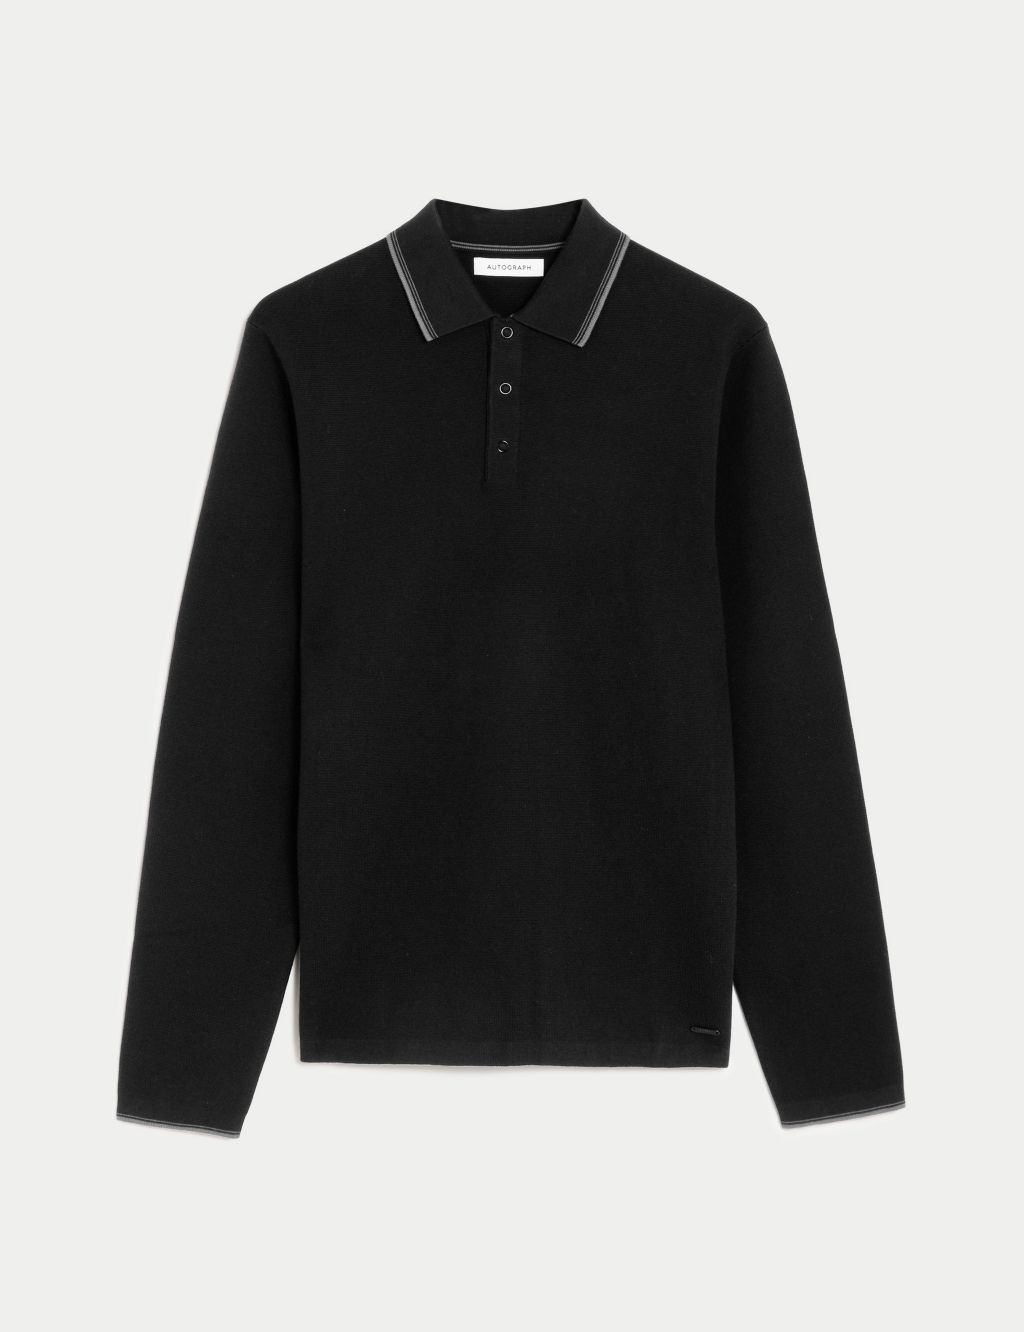 Cotton Rich Tipped Knitted Polo Shirt | Autograph | M&S